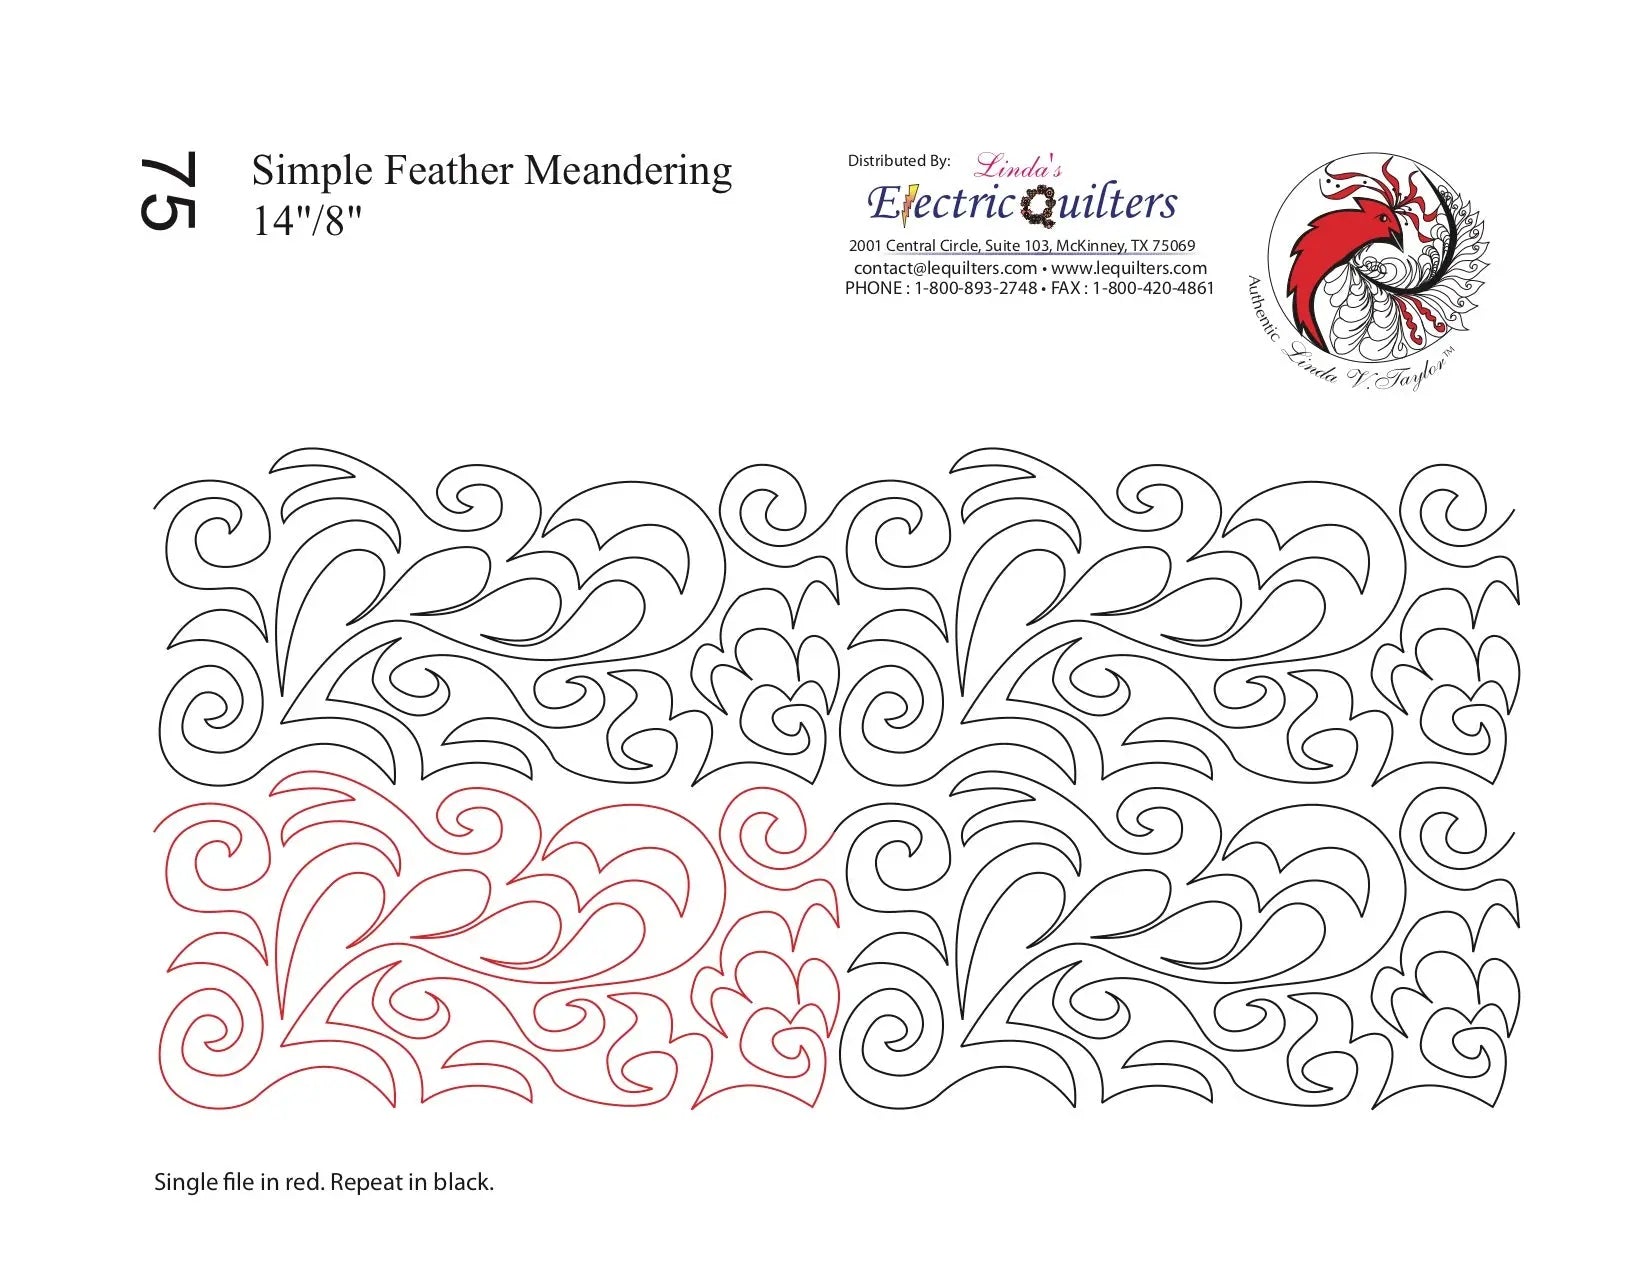 075 Simple Feather Meandering Pantograph by Linda V. Taylor - Linda's Electric Quilters